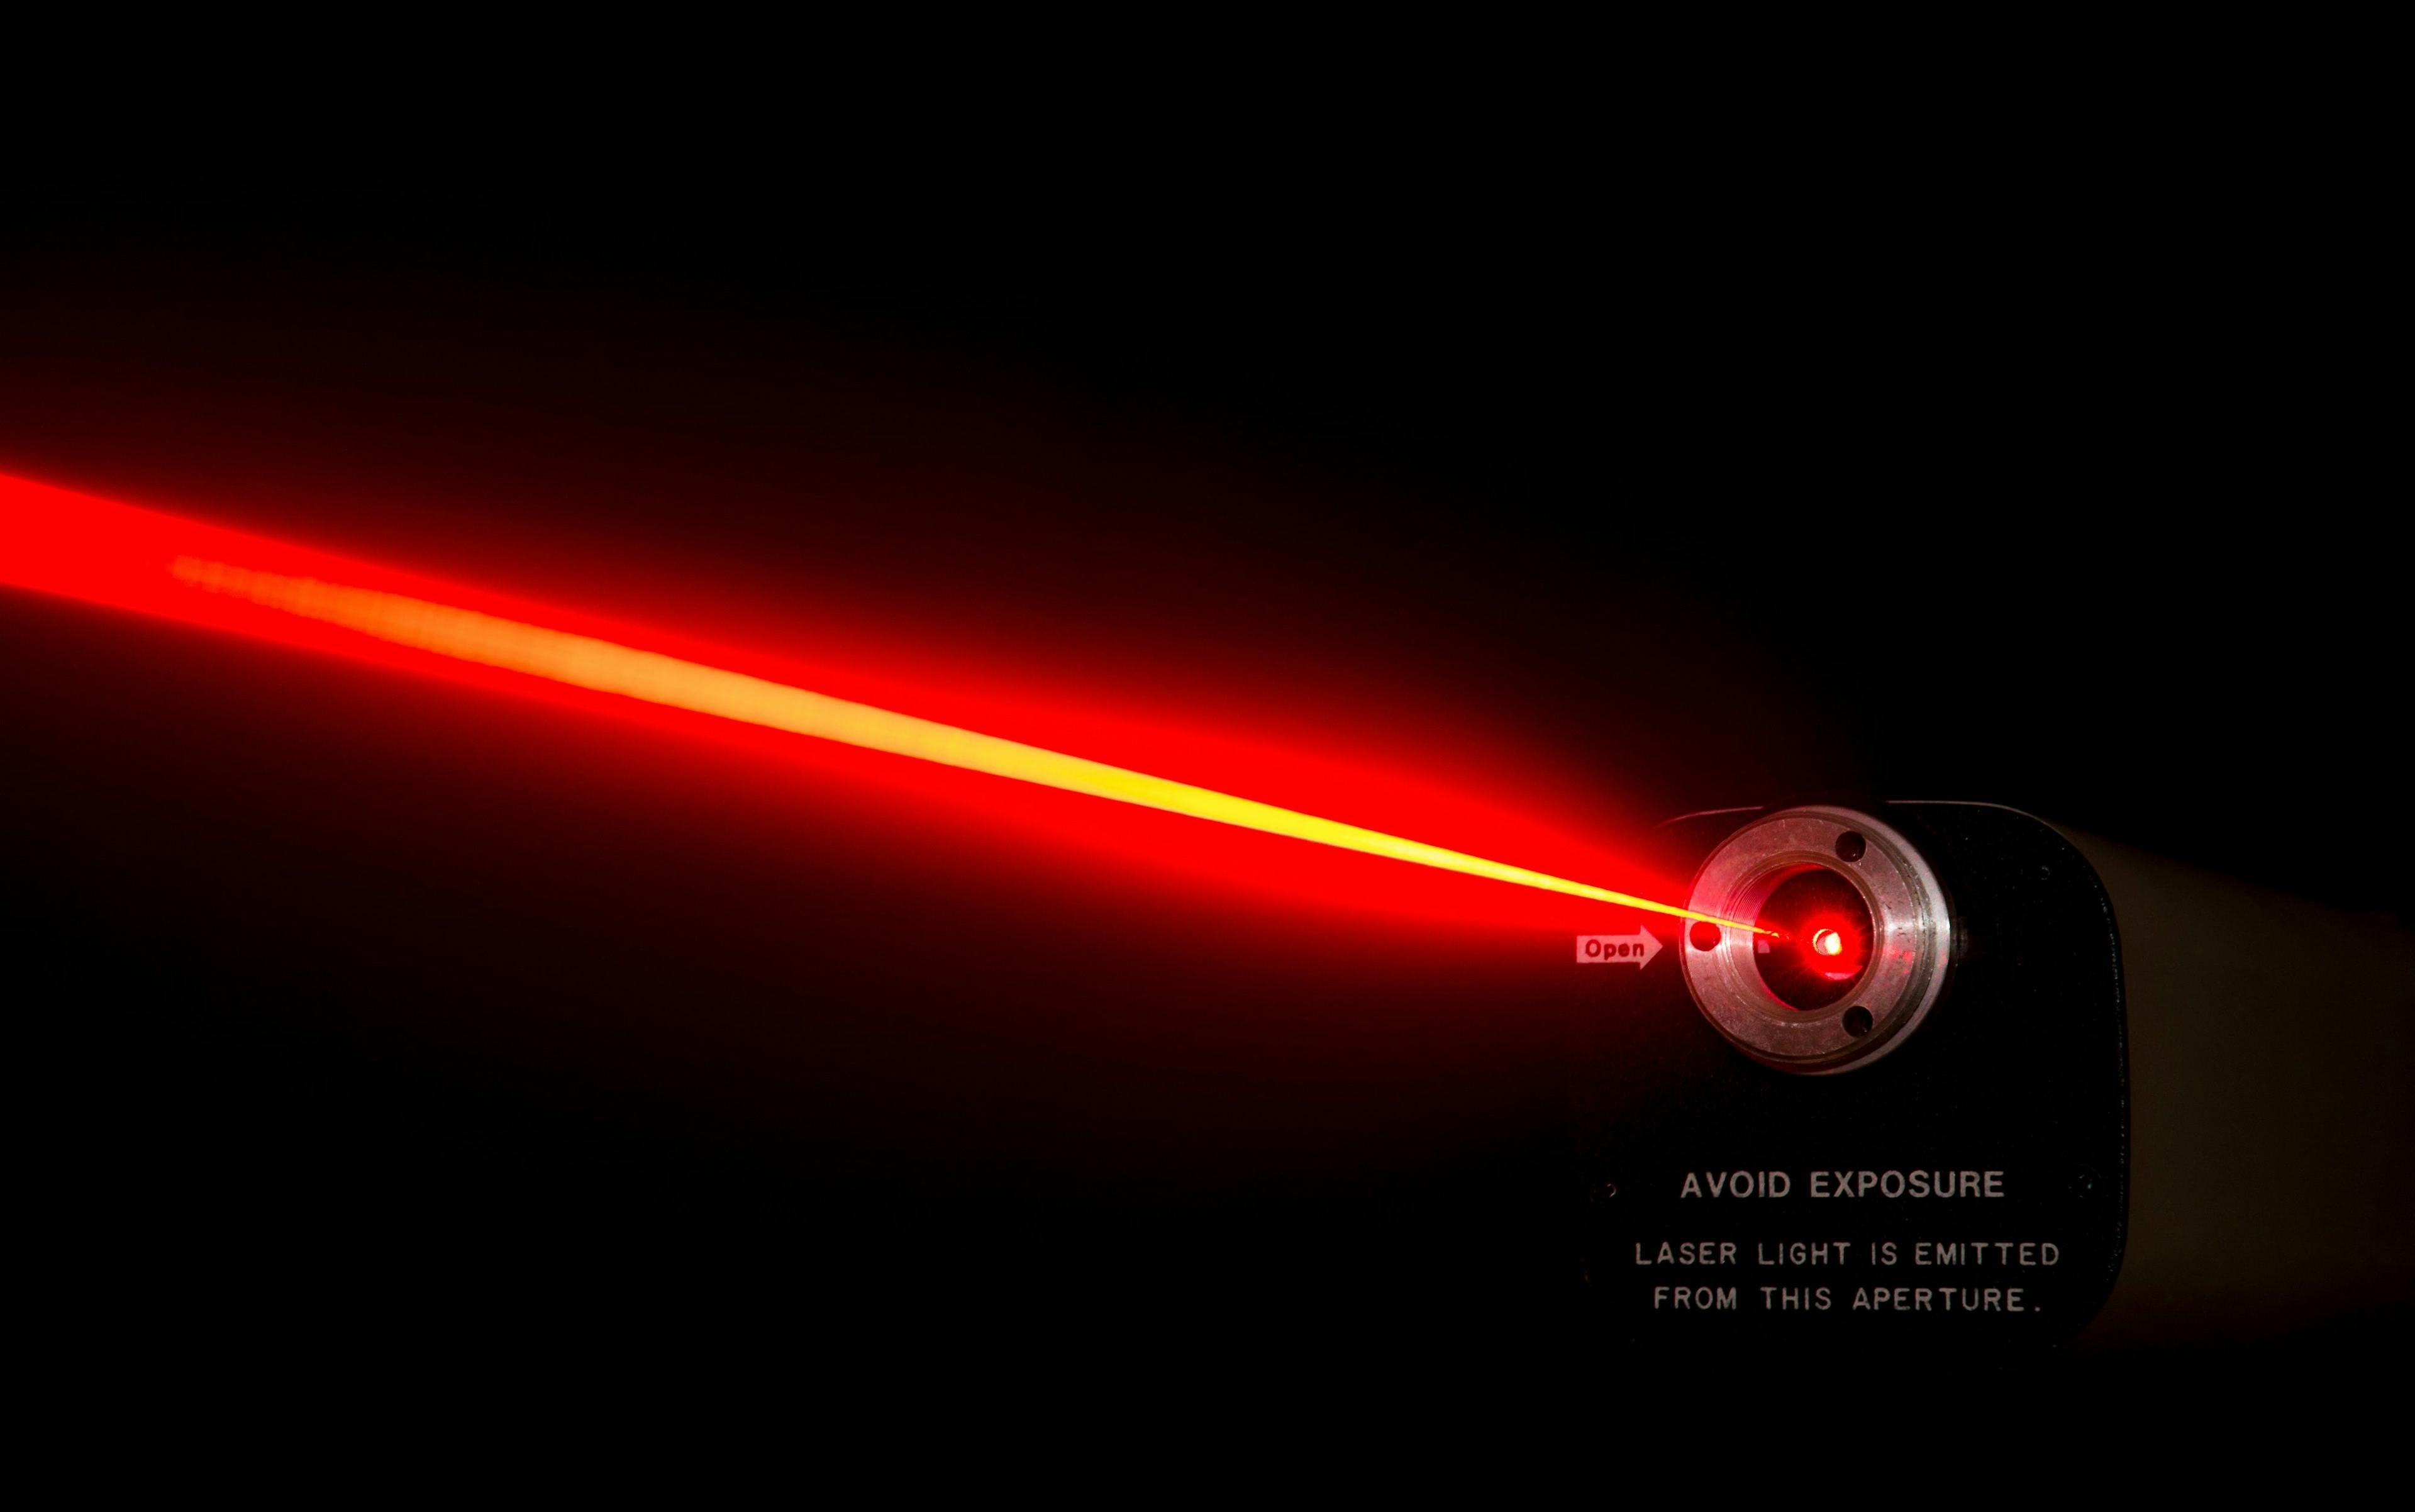 Red laser beam from a lab laser. Warning notice on front. Black background. | Image Credit: © madscinbca - stock.adobe.com